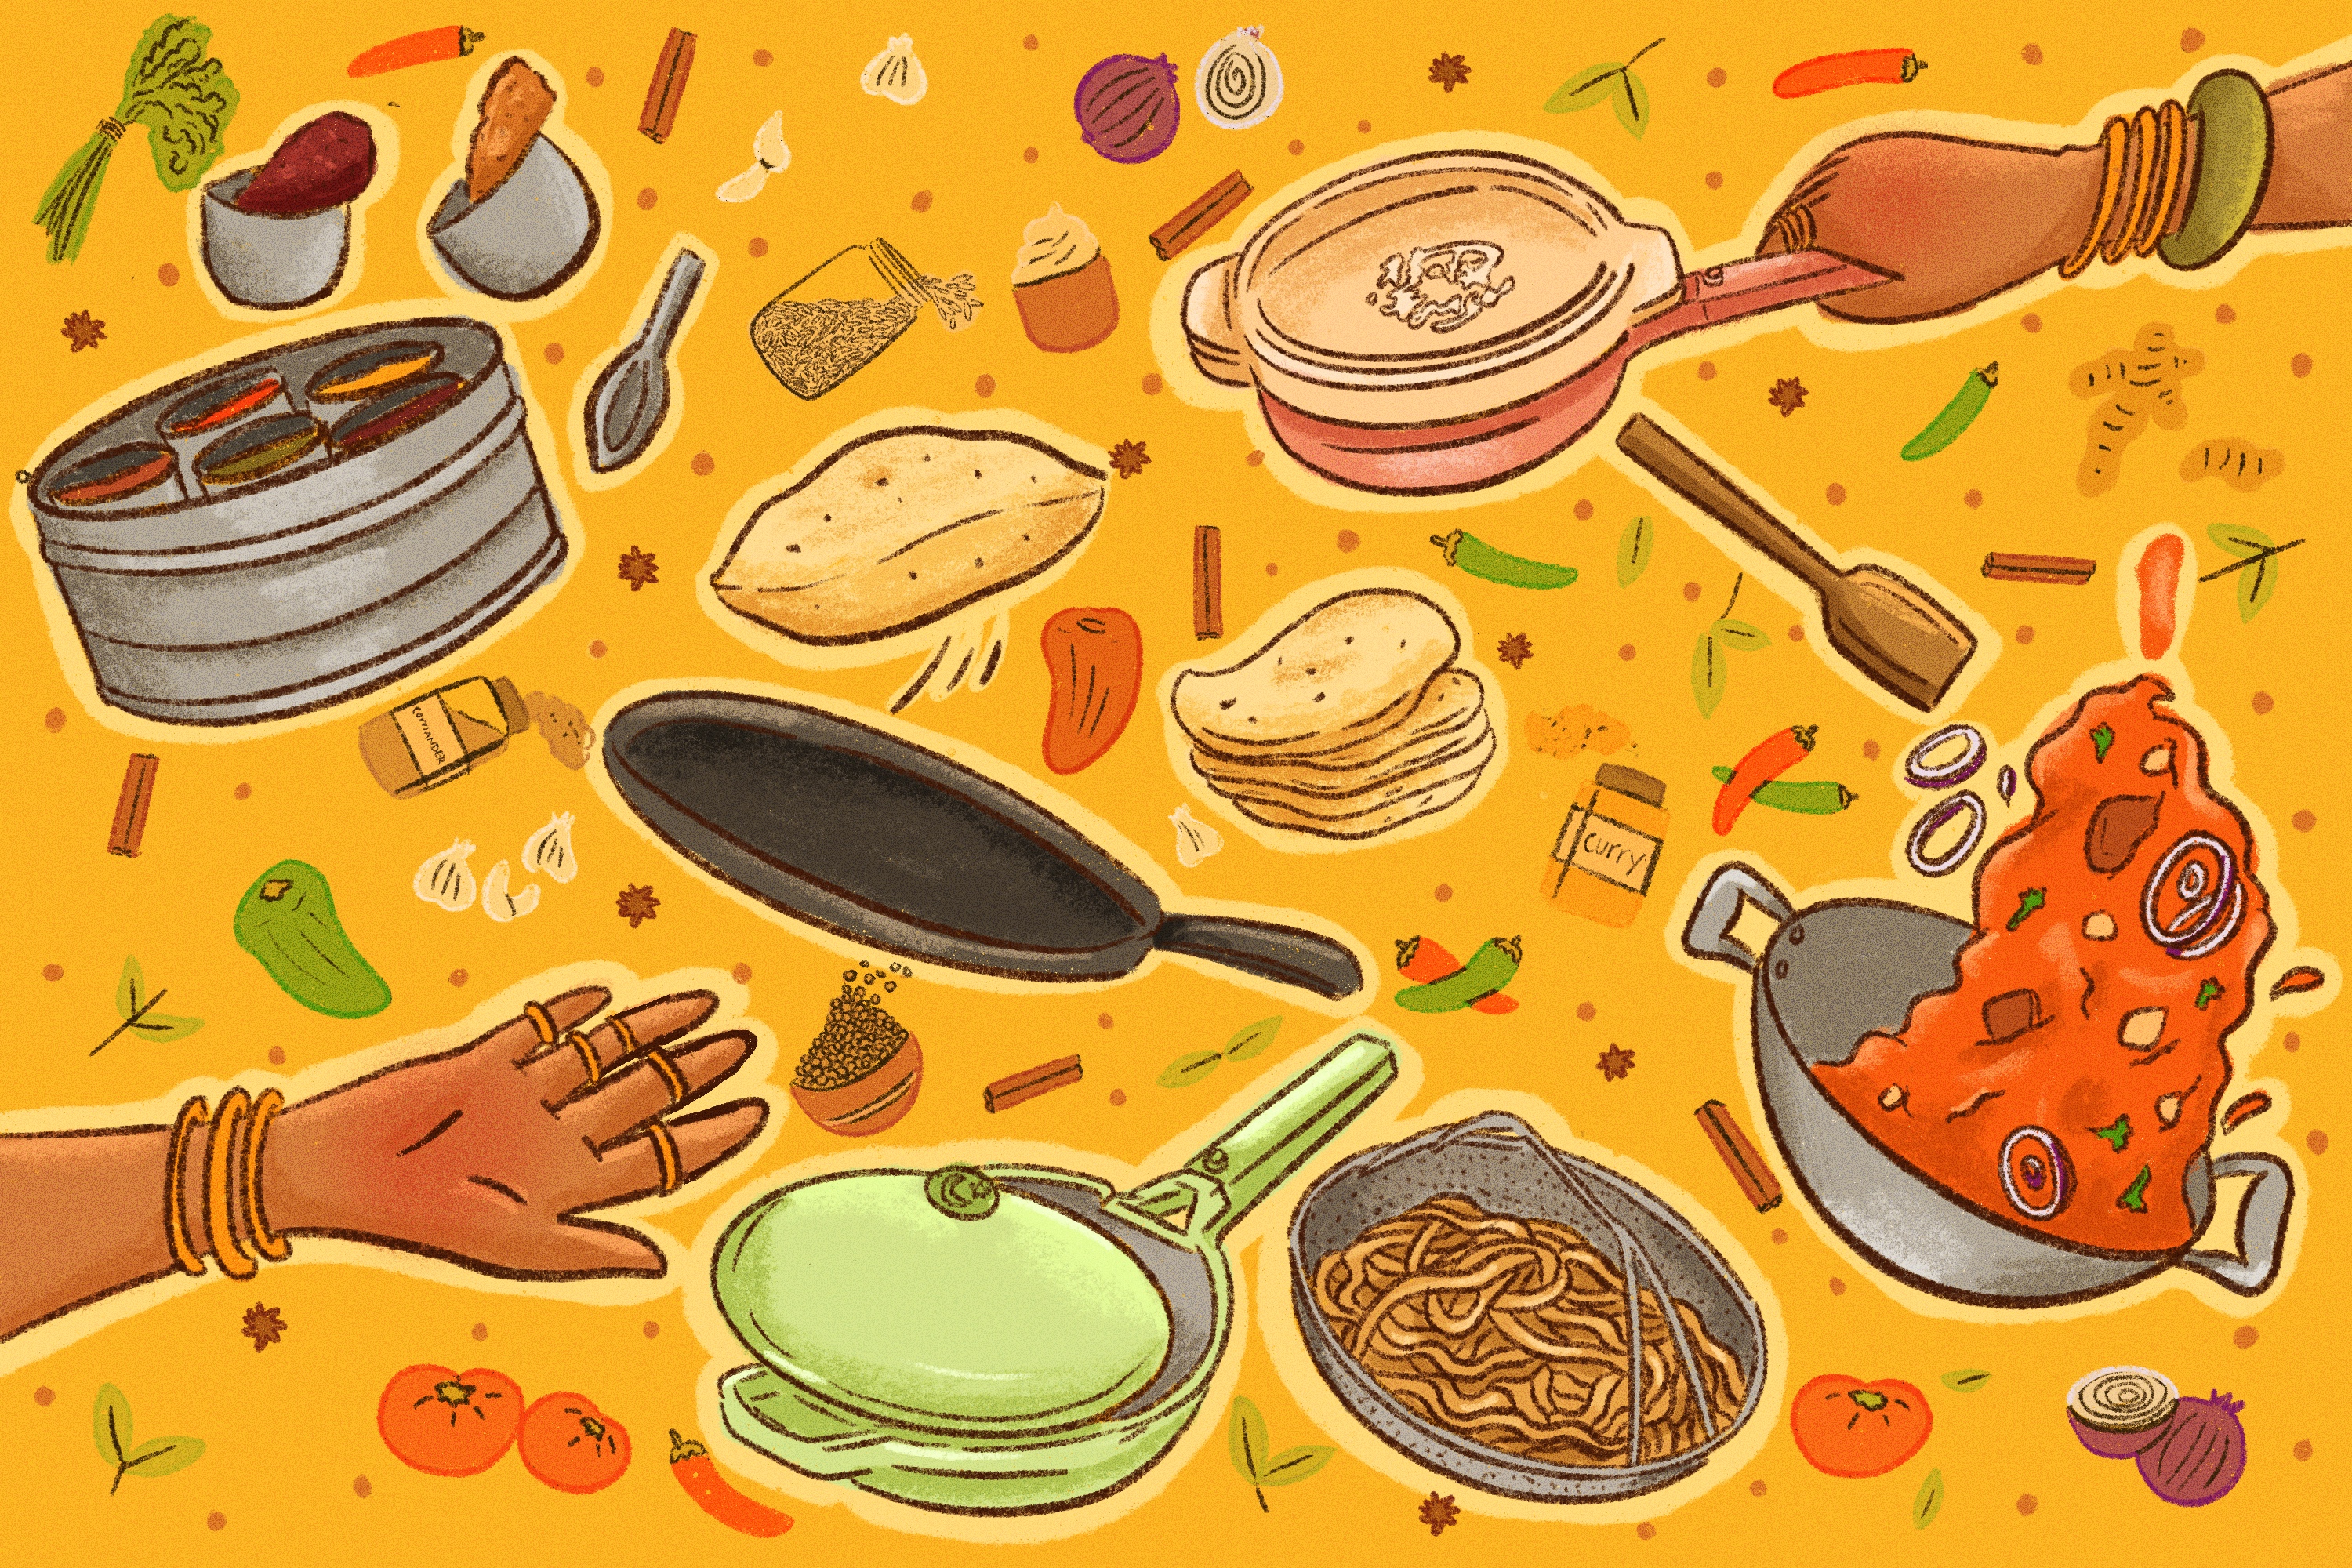 Illustration of a flipping pan, tawa, and masala dabba, among other cooking tools, on a colorful background showing spices and chiles.